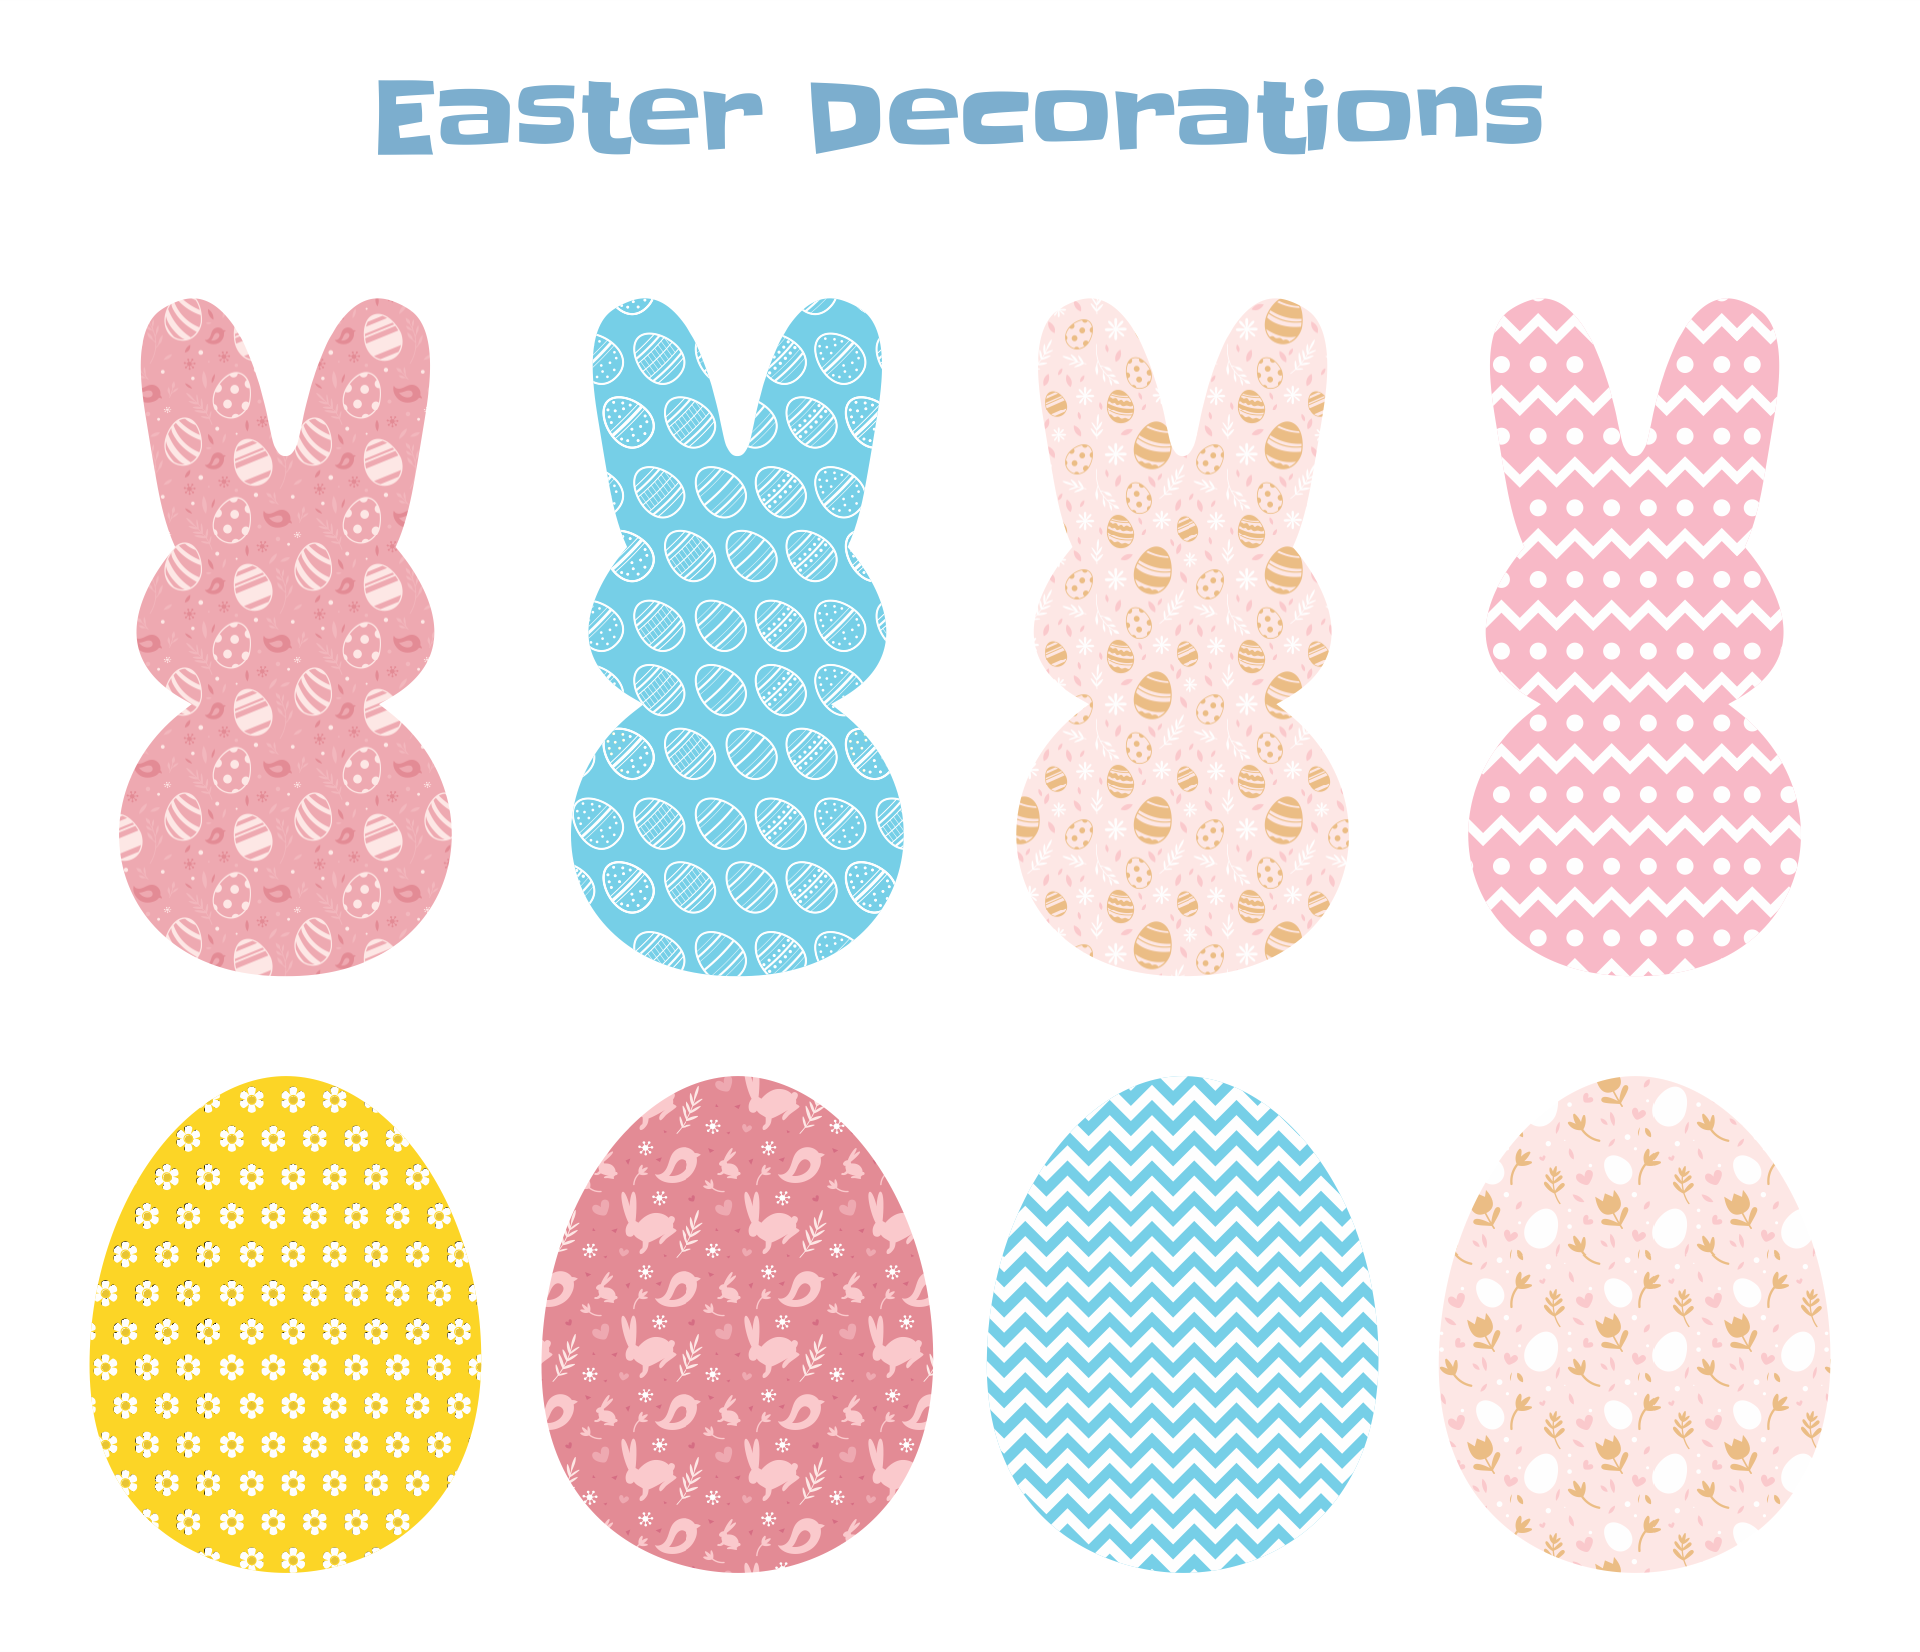 Printable Easter Decorations